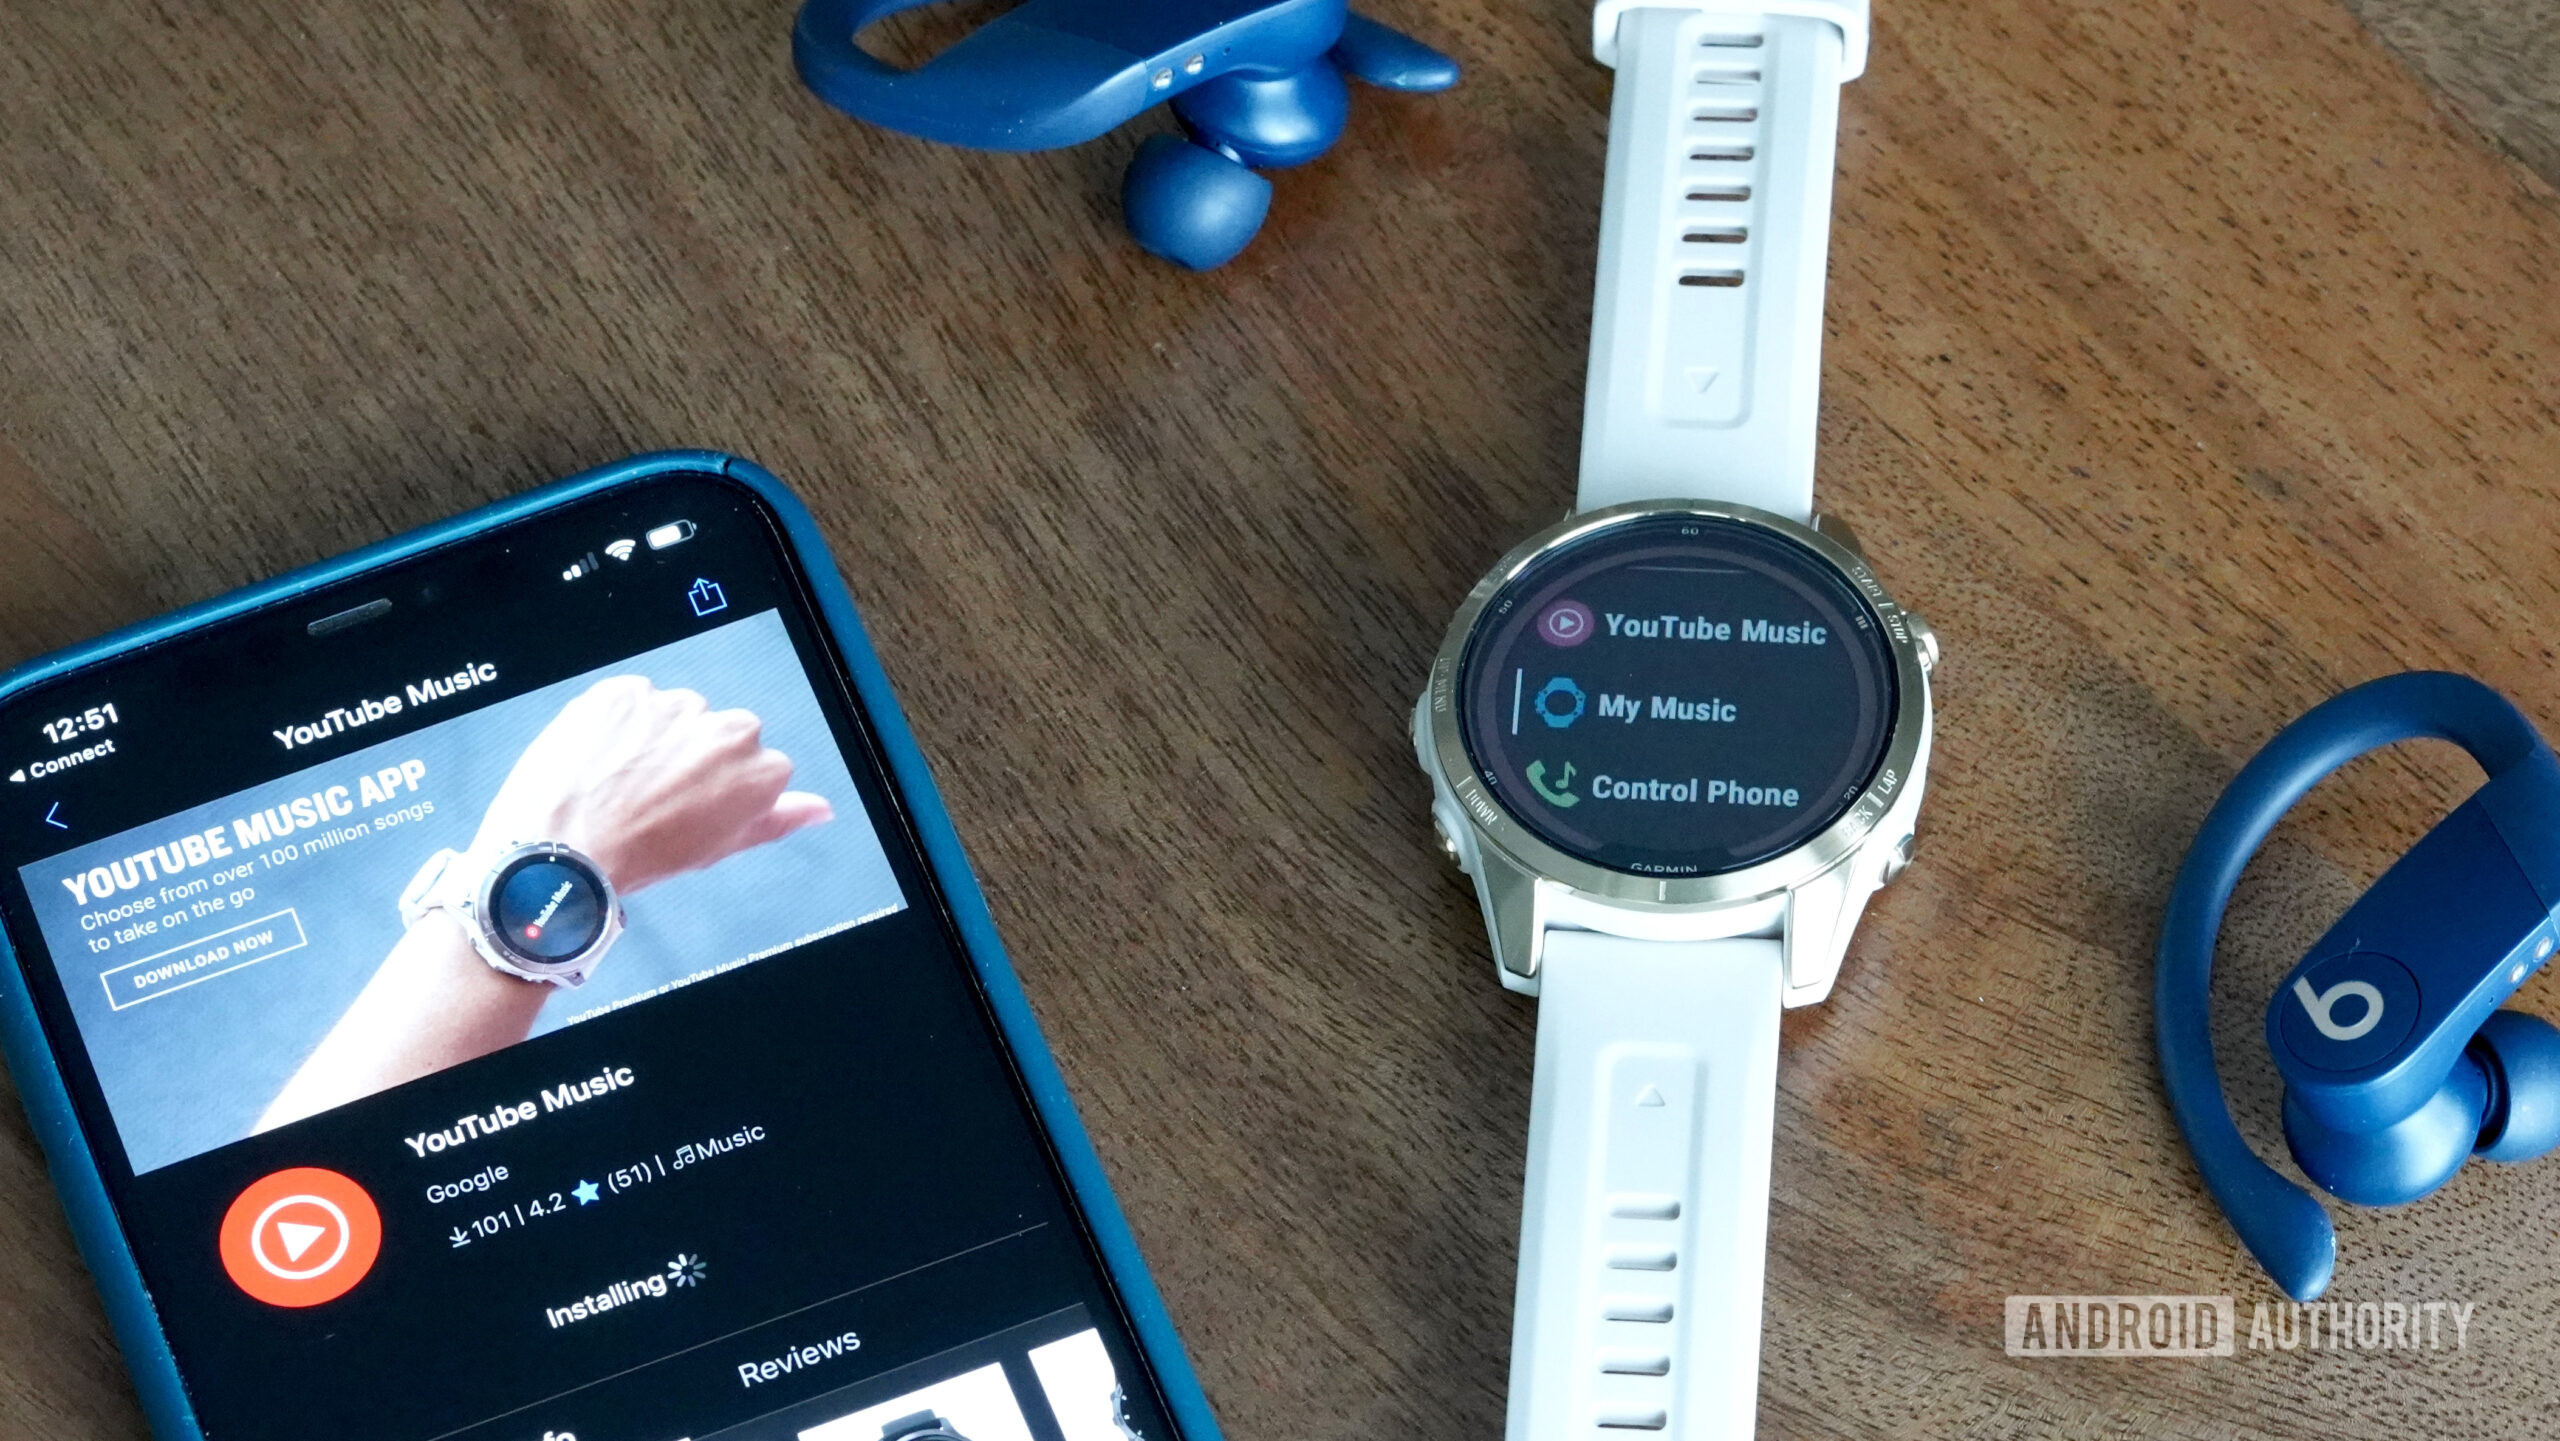 Garmin adds the YouTube Music app to users’ wrists